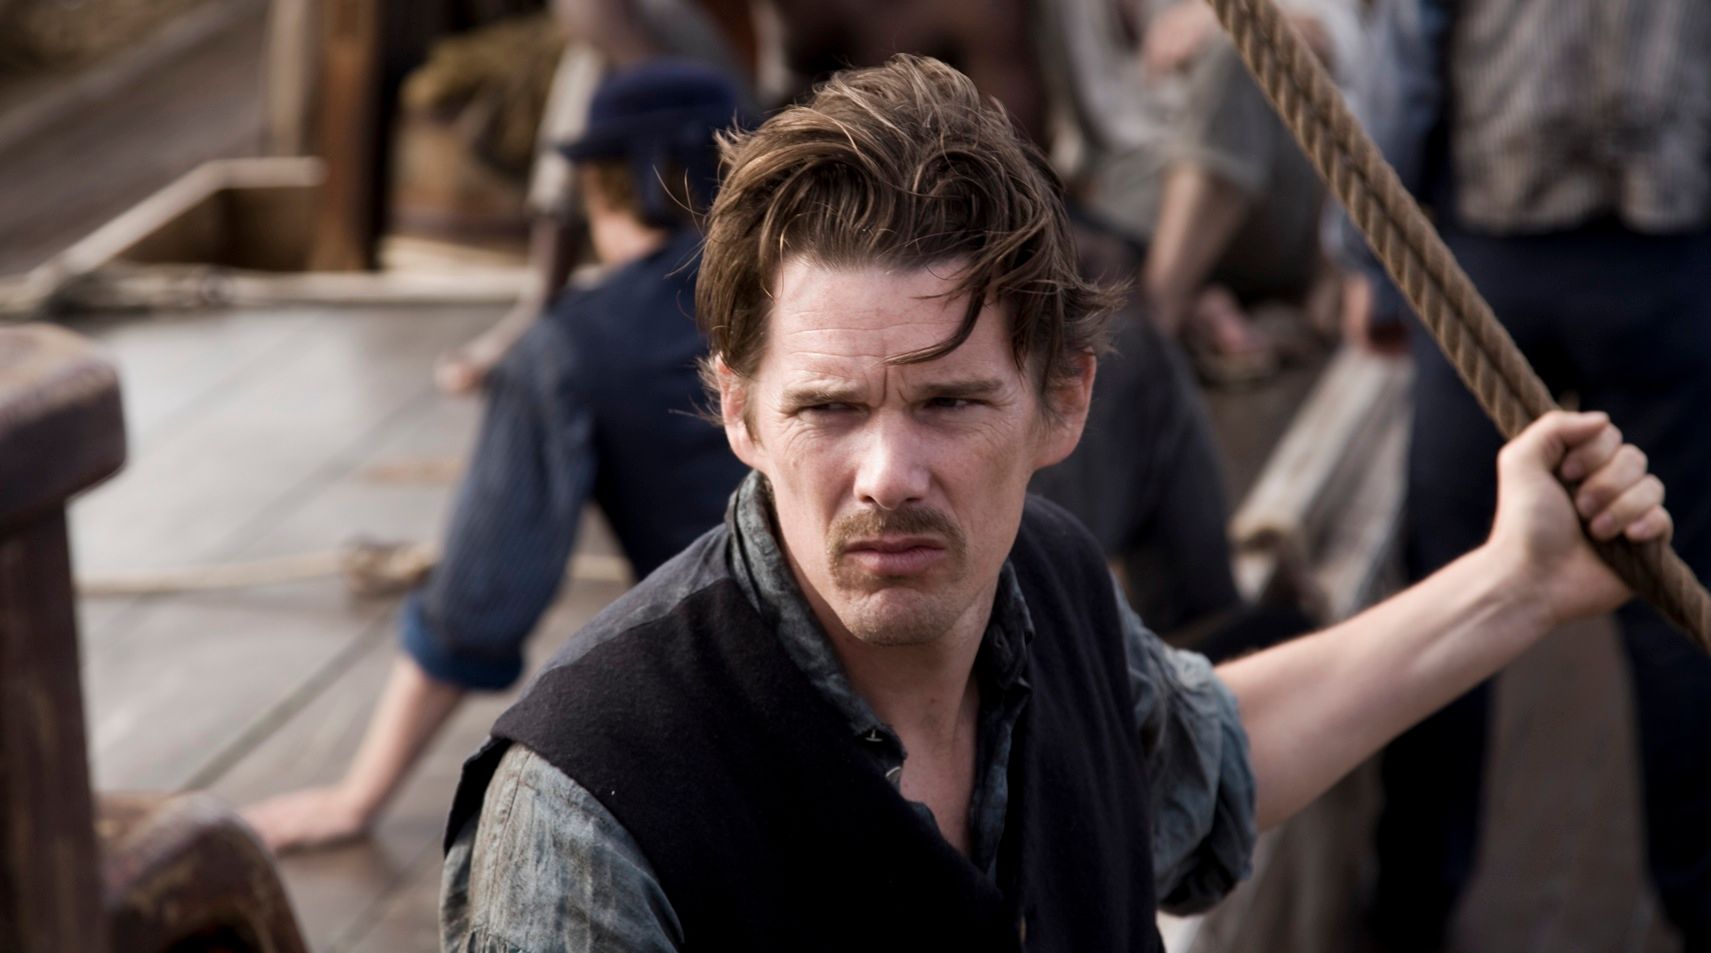 Ethan Hawke as Starbuck in Moby Dick mini-series